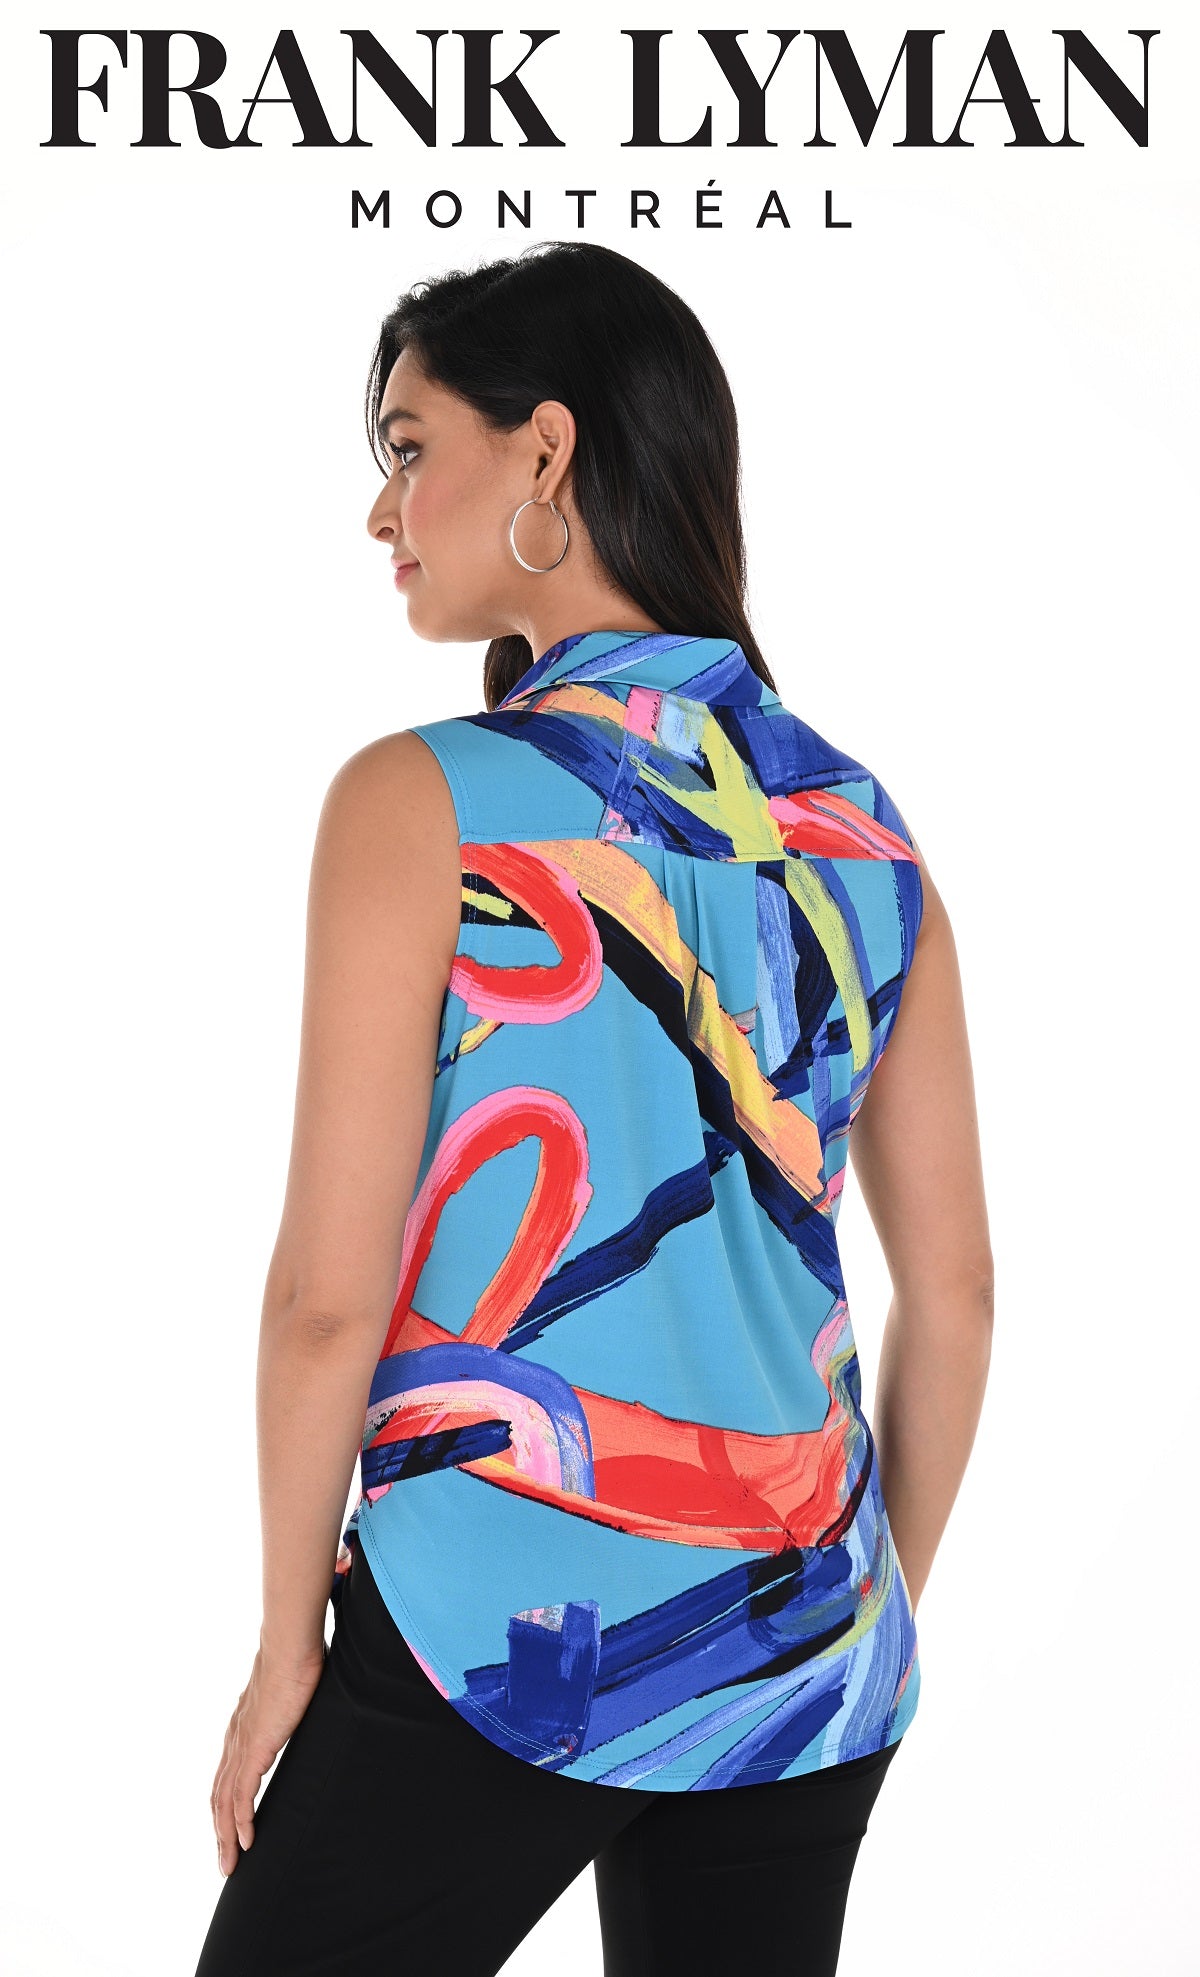 Frank Lyman Montreal Sleeveless Multi Colored Tunic With Embellished Zipper